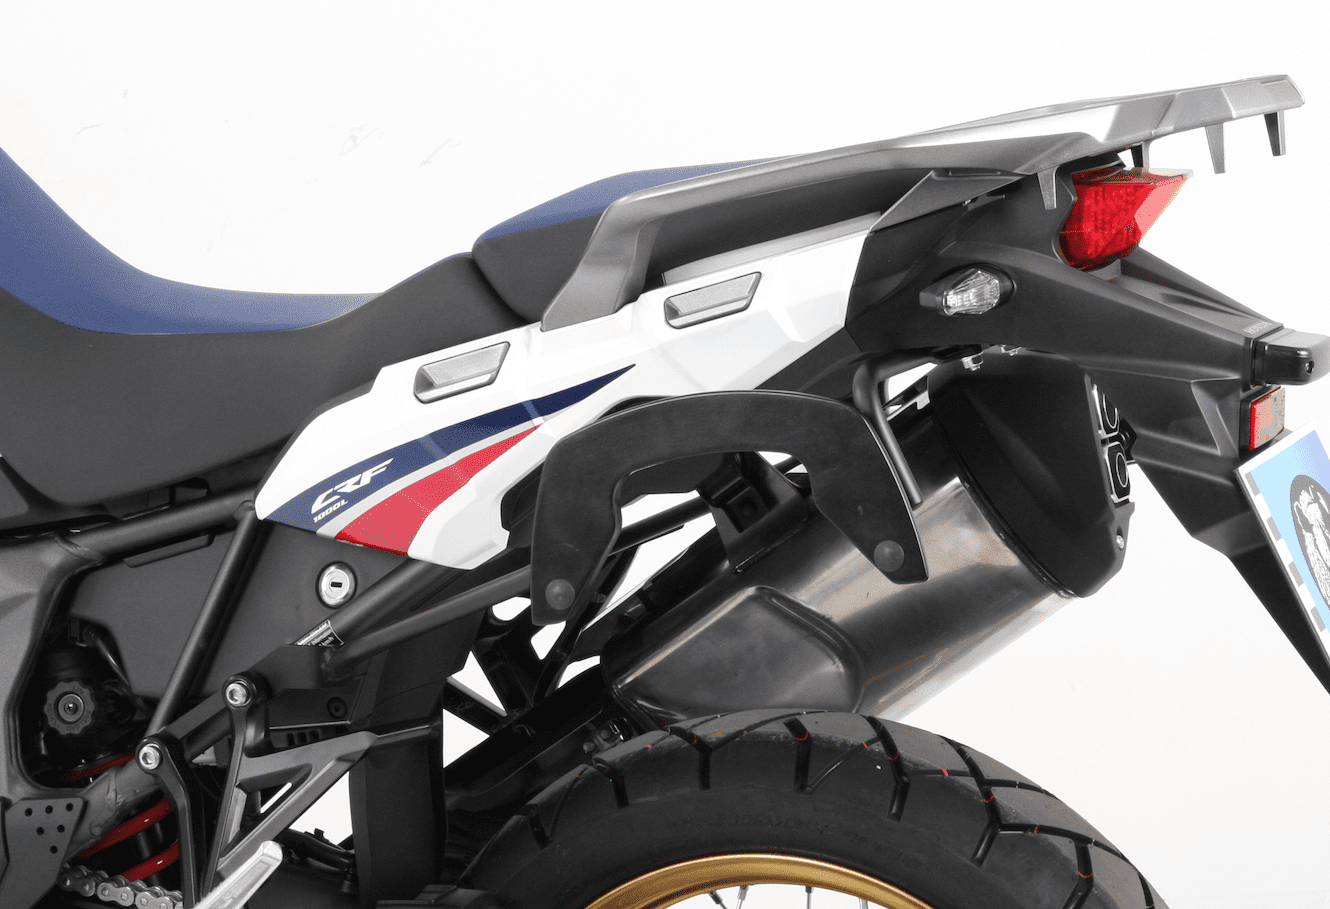 Hepco & Becker C-Bow pages SUPPORT NOIR HONDA CRF 1000 Africa Twin 2016-2017 